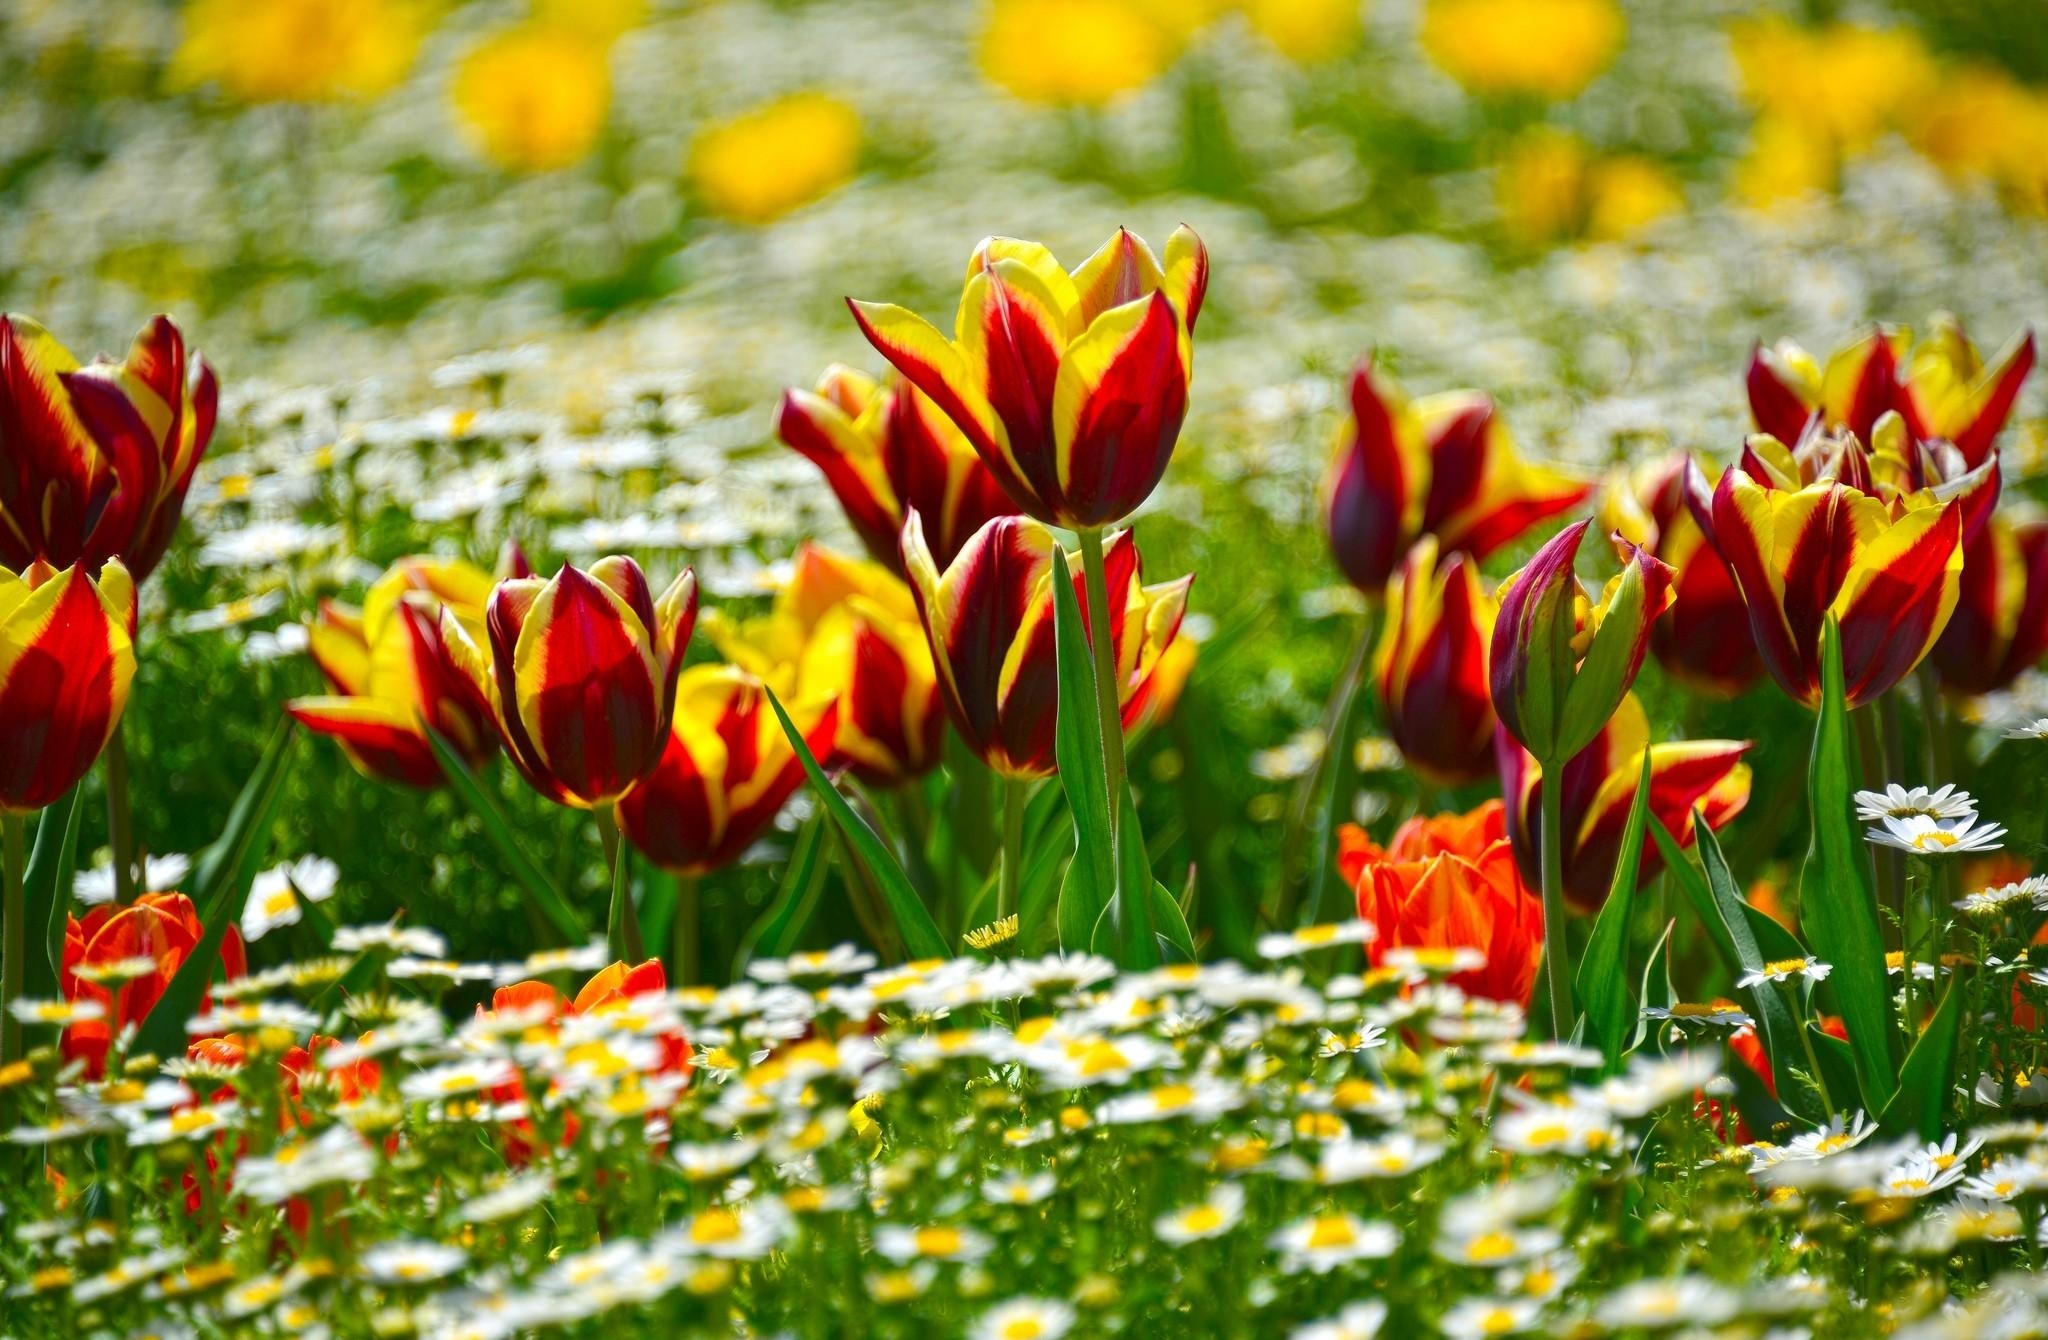 flower bed, tulips, flowers, camomile, blur, smooth, flowerbed, sunny High Definition image